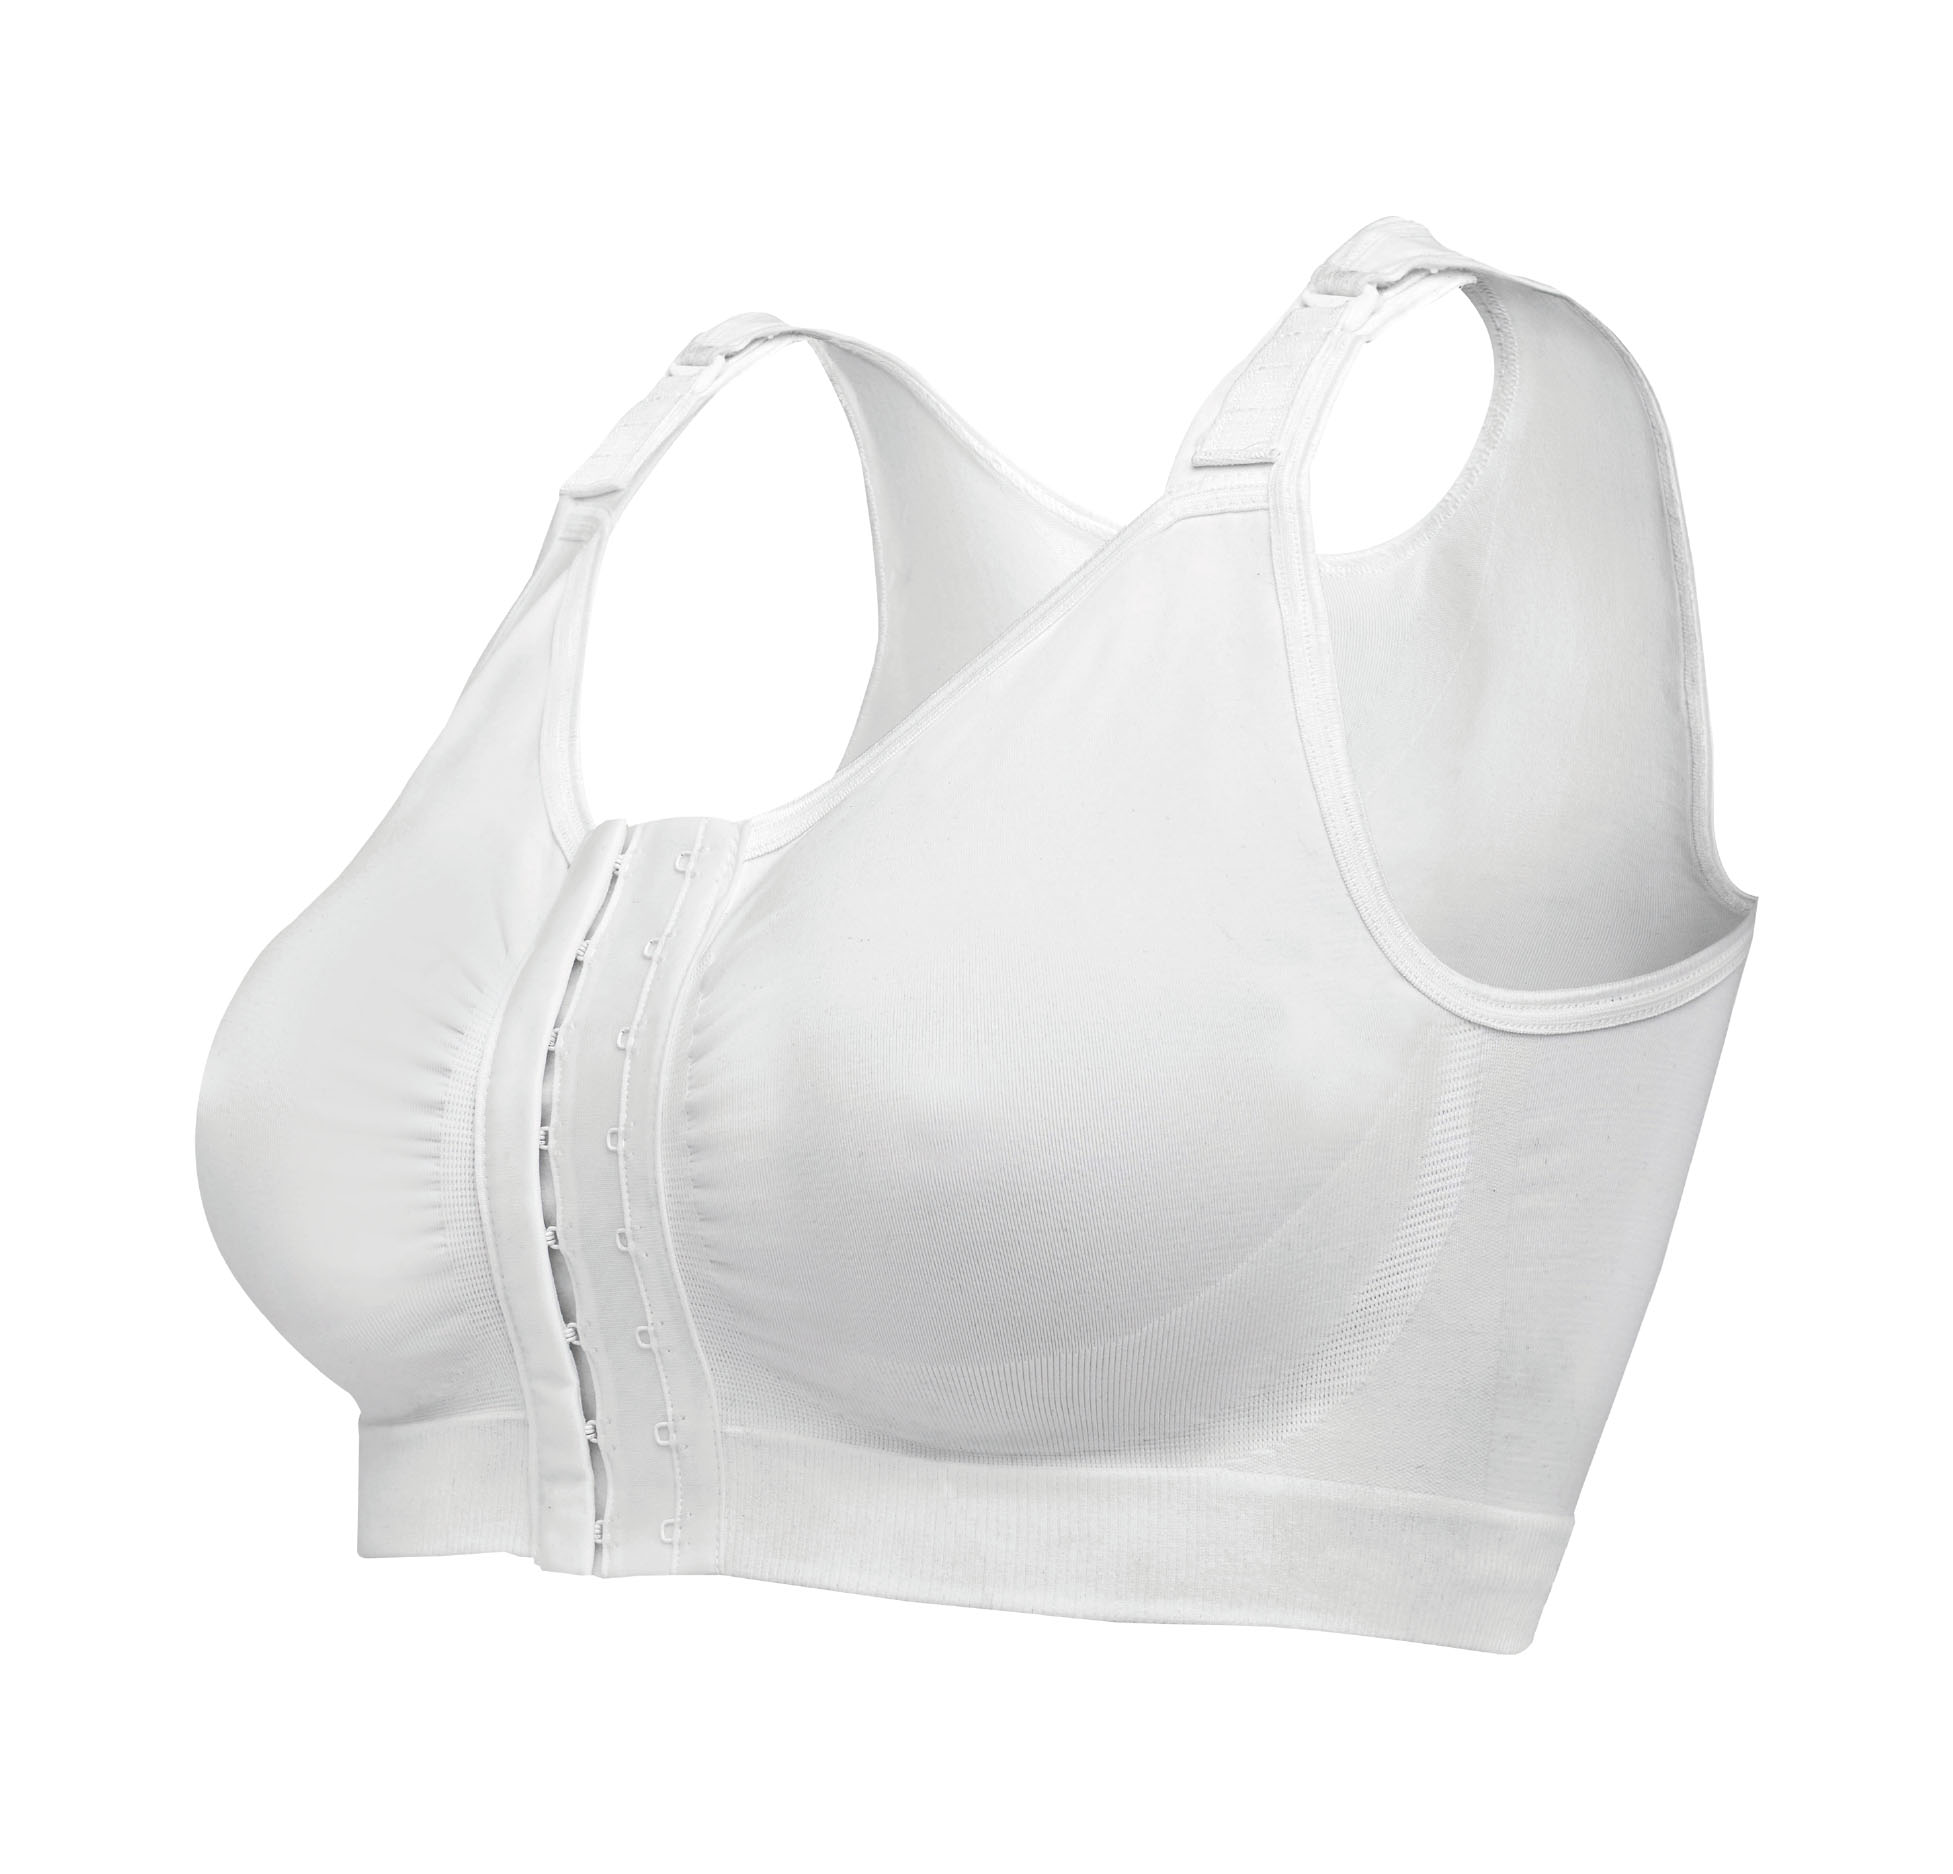 Reco Post Surgical Recovery Bra